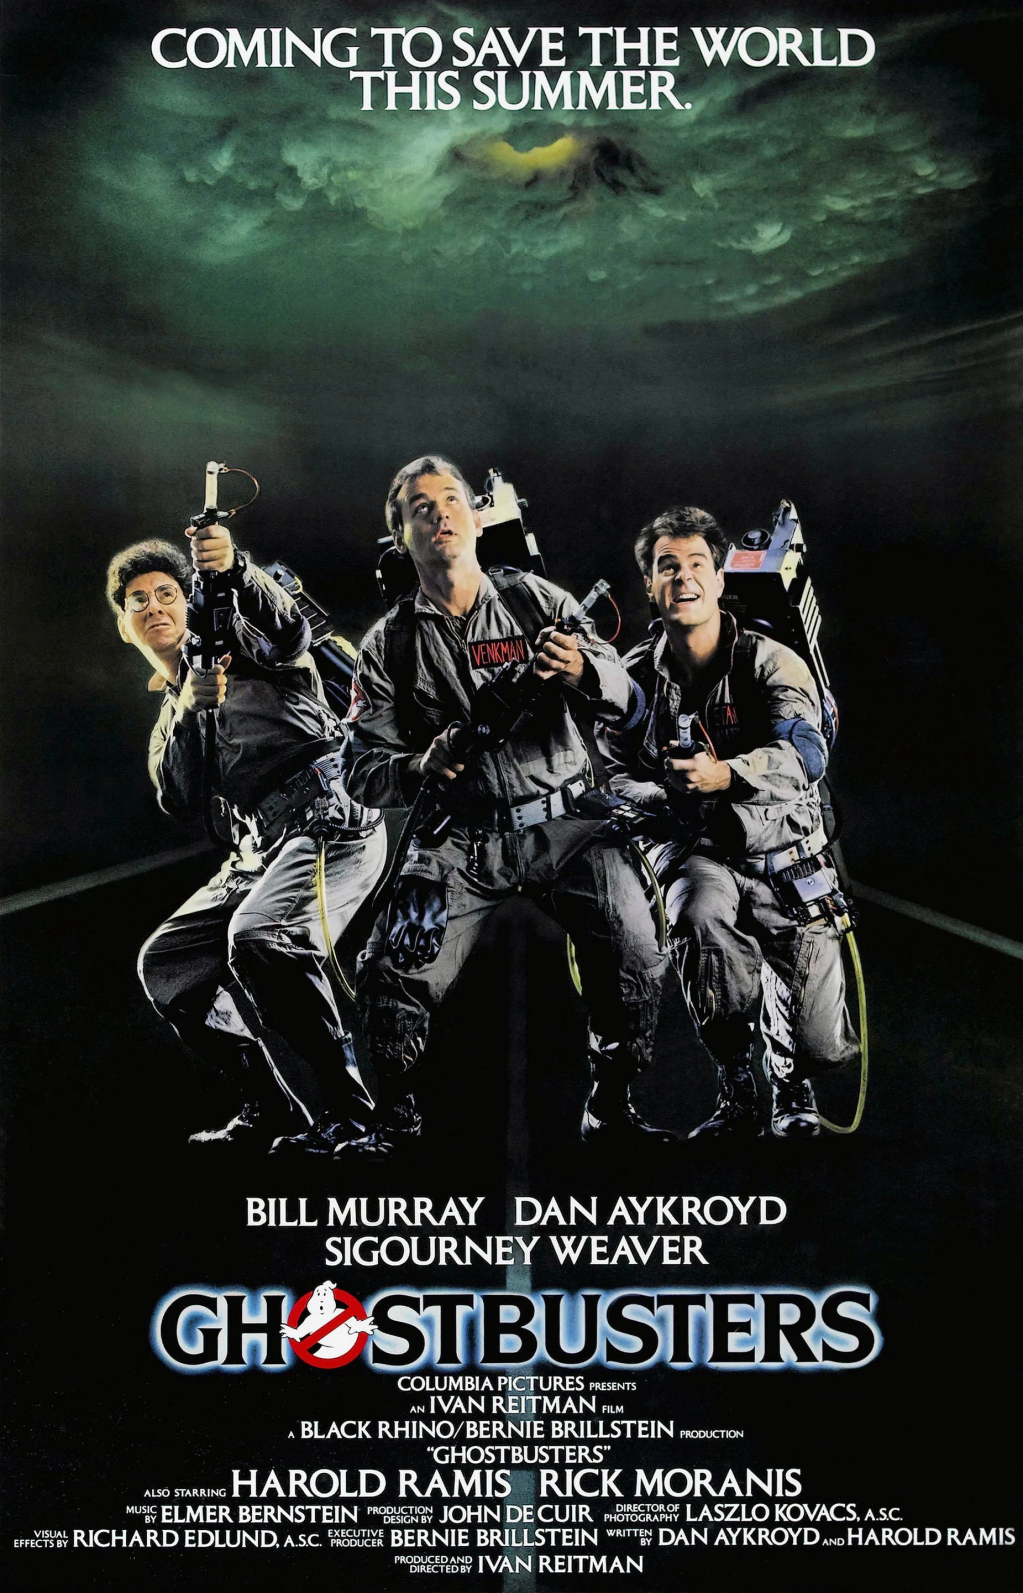 The official US theatrical poster for Ghostbusters (1984), Columbia Pictures